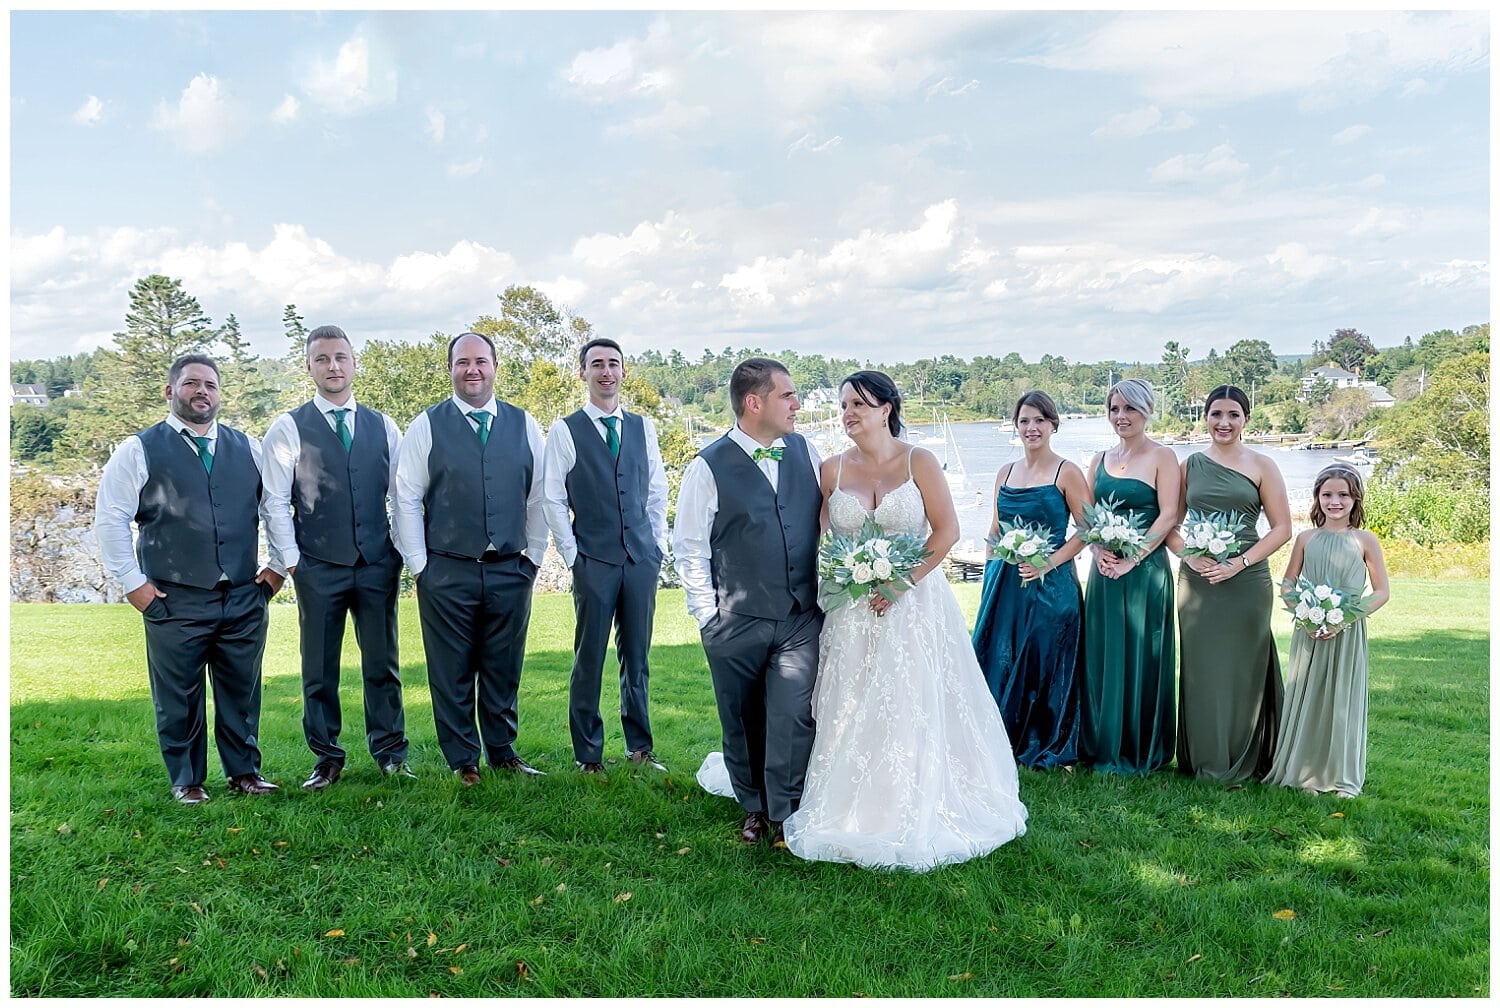 The bride and groom with their wedding party pose for wedding photos in Hubbards NS.